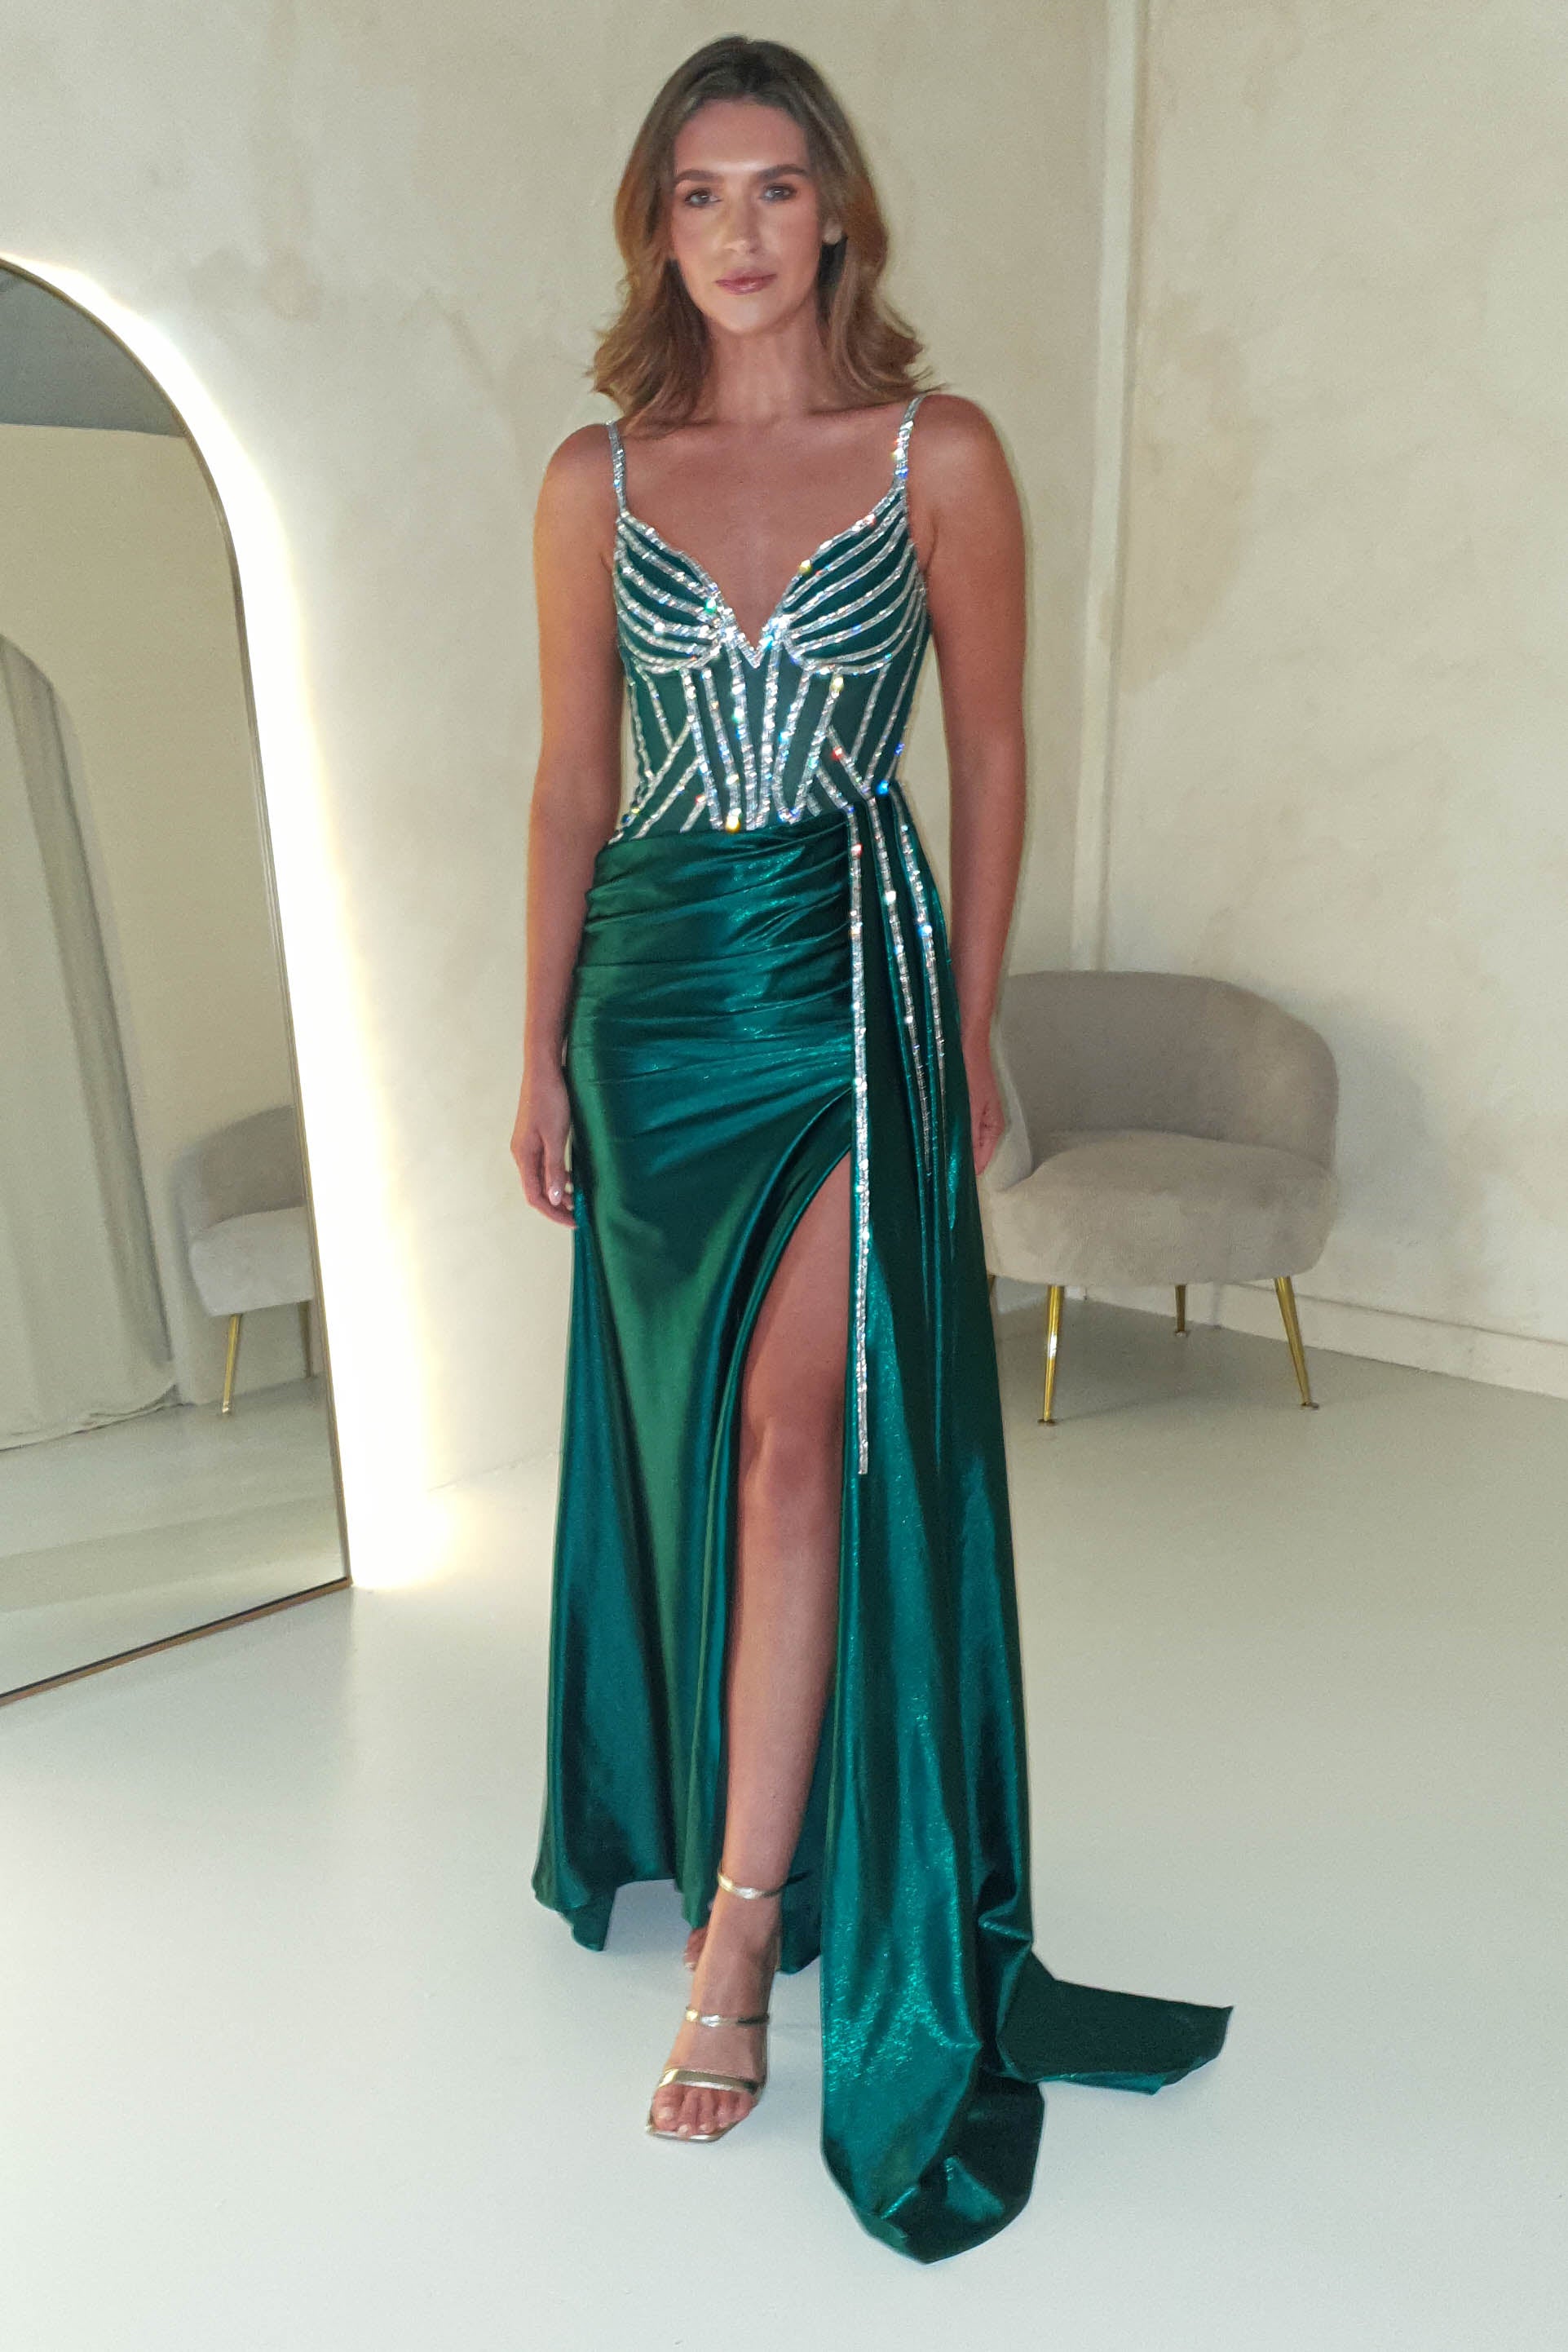 1-done-cds440-sample-green-gown-with-diamantes-dresses-51970904195413.jpg